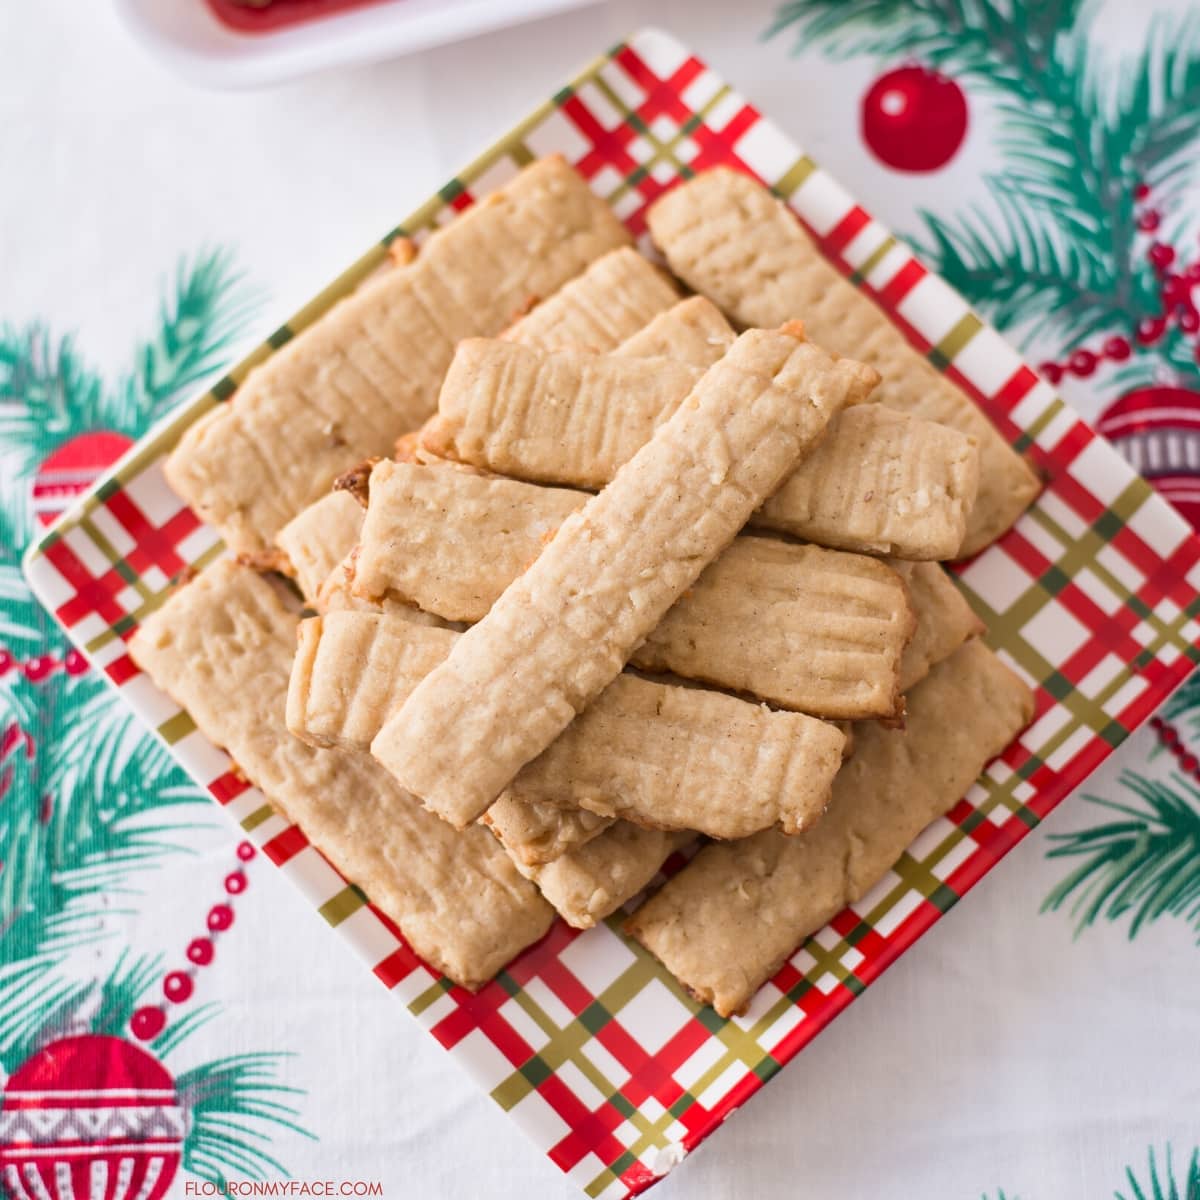 A Christmas plate with a pile of baked Coconut Washboard Cookies